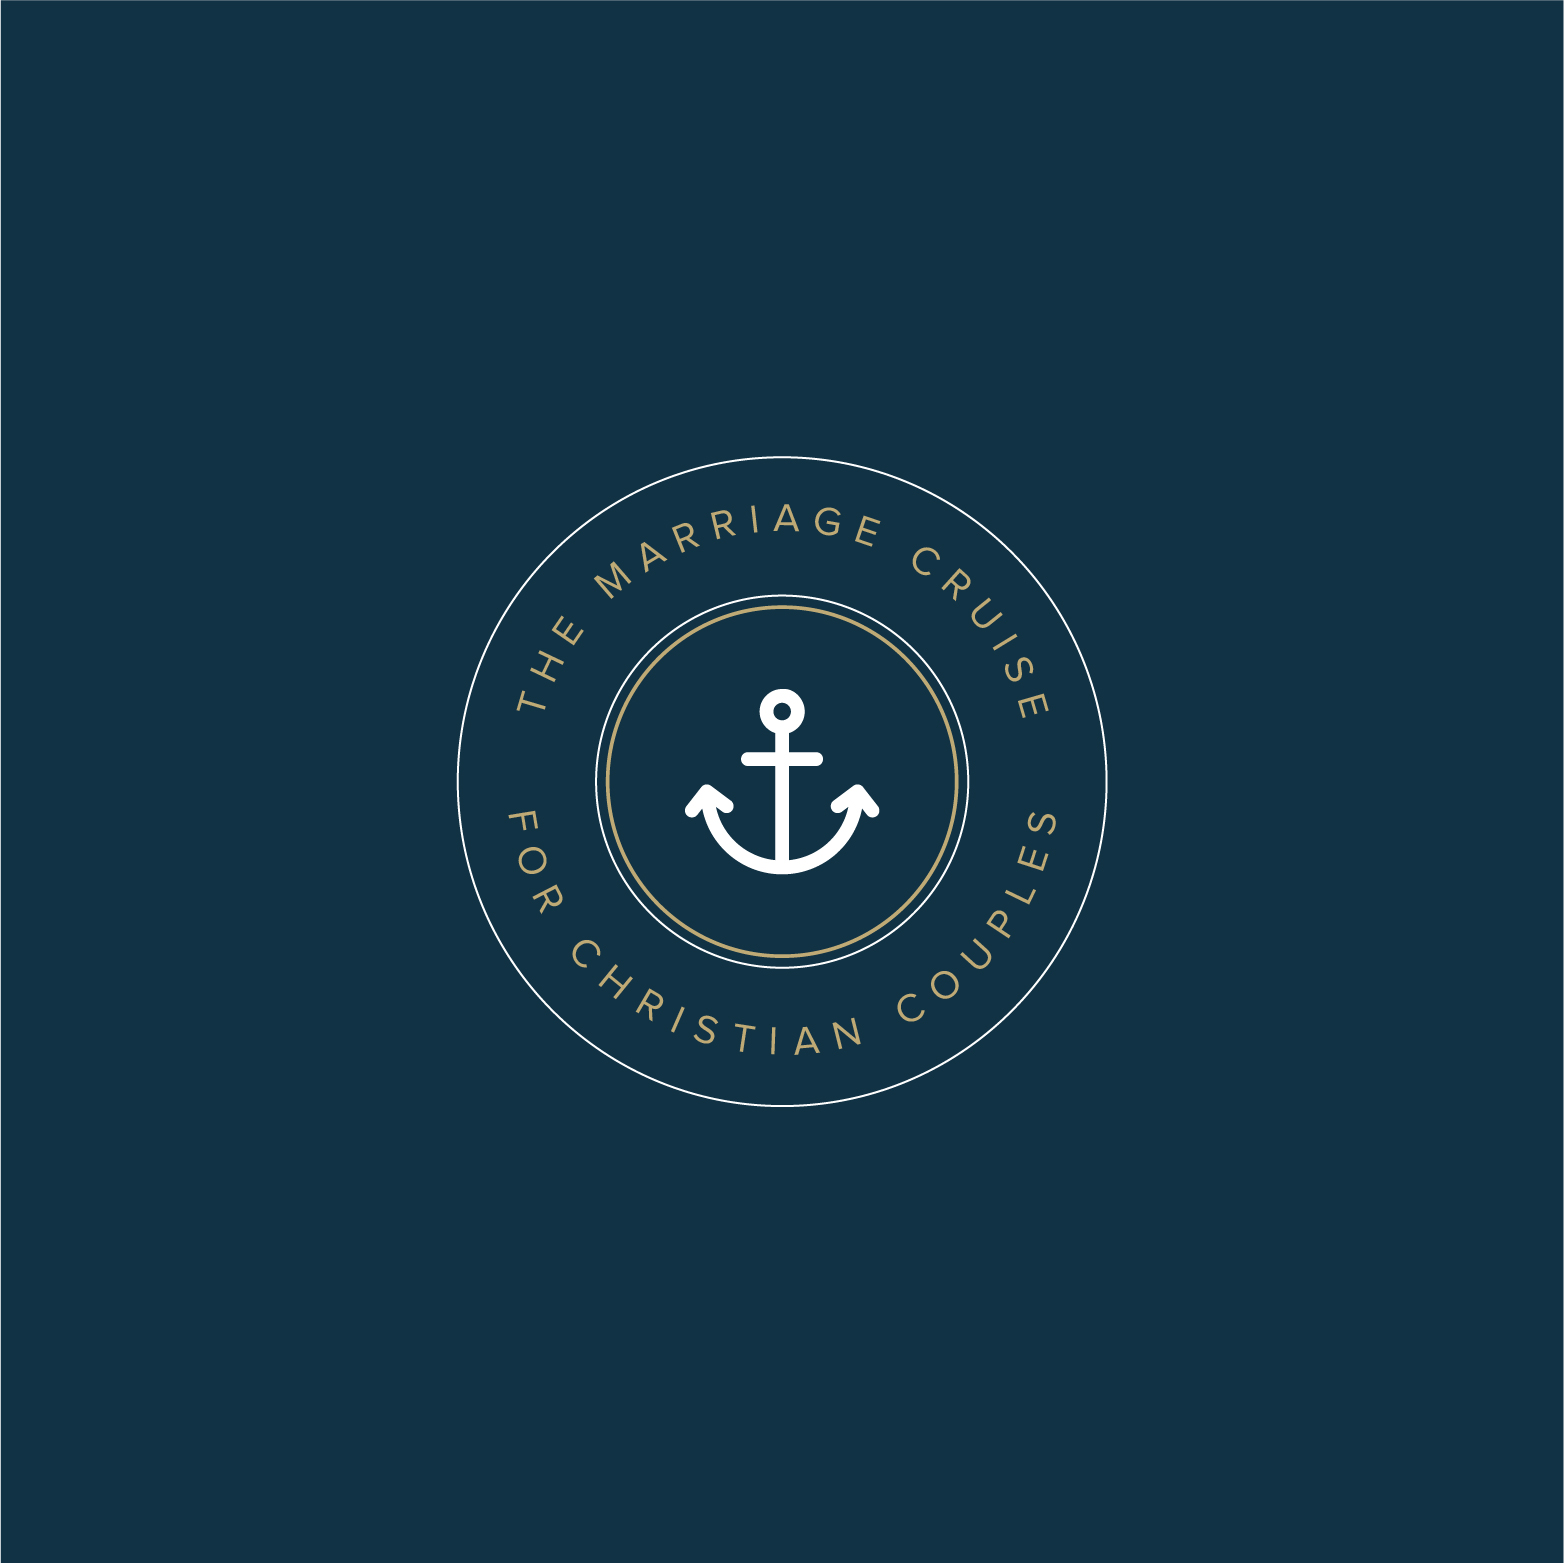 The Marriage Cruise for Christian Couples logo